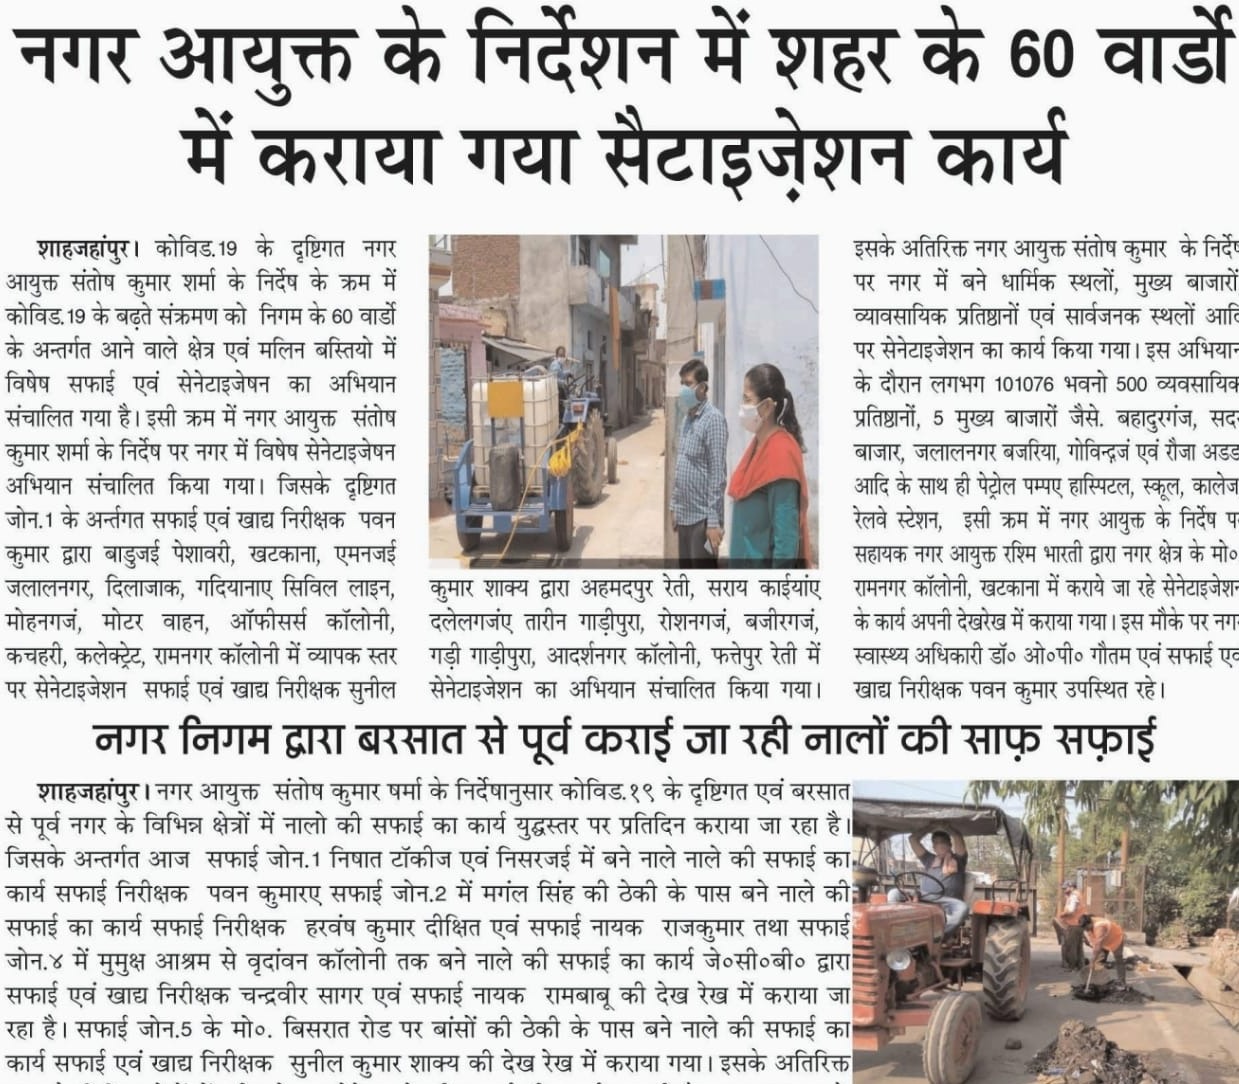 Sanitization work done in 60 wards on the direction of the Municipal Commissioner.